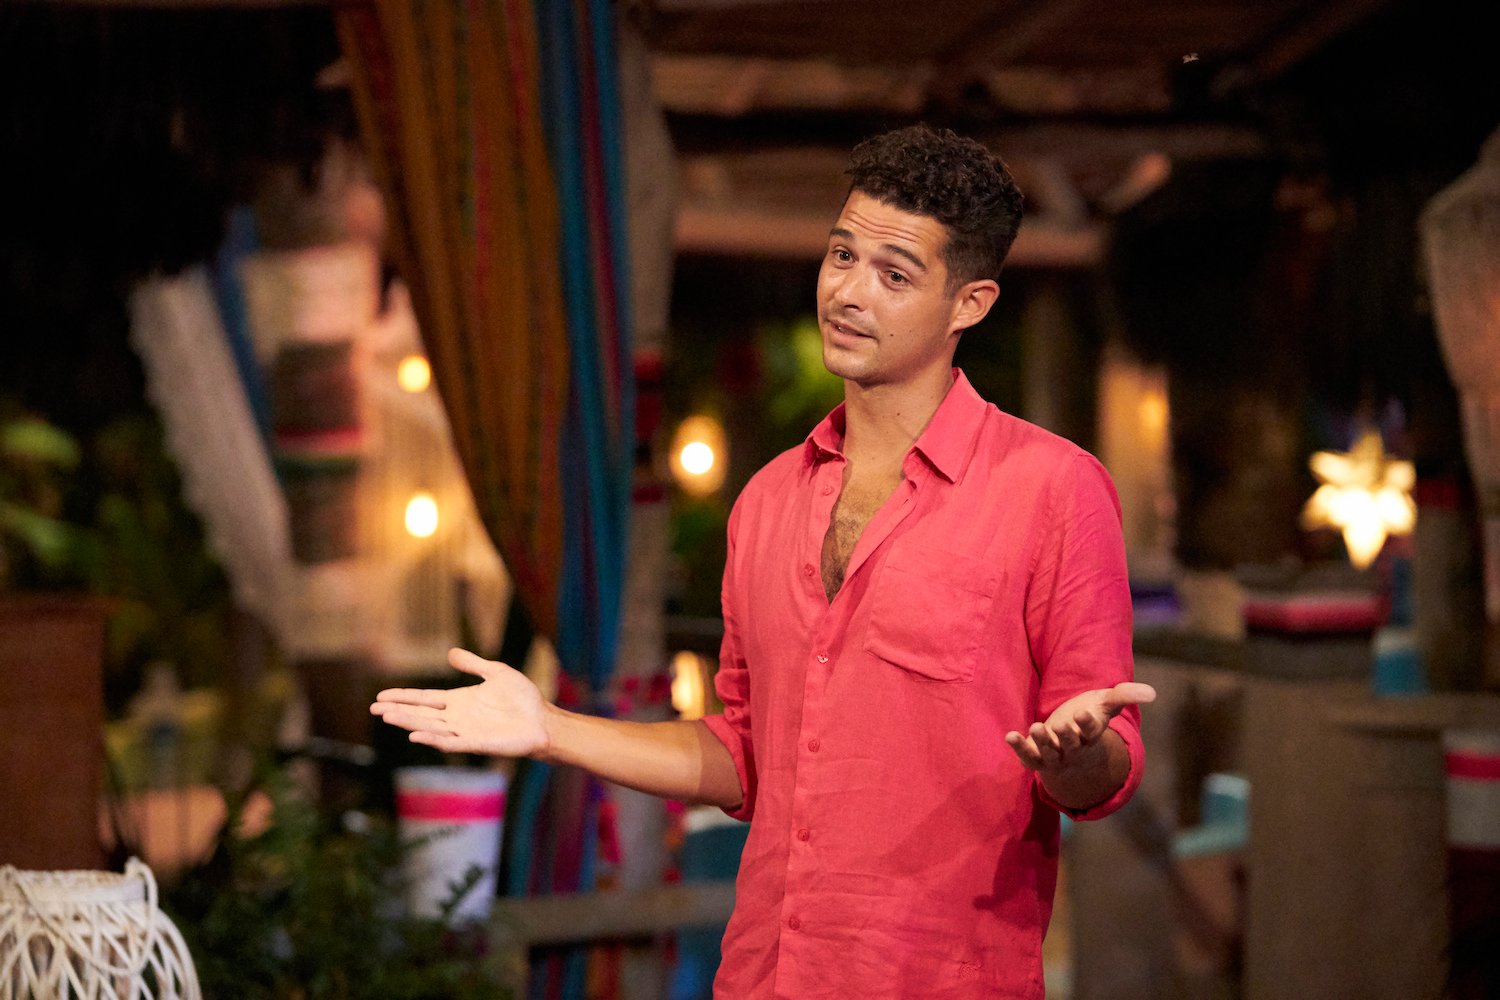 The 'Bachelor in Paradise' Season 8 bartender Wells Adams on the beach at night